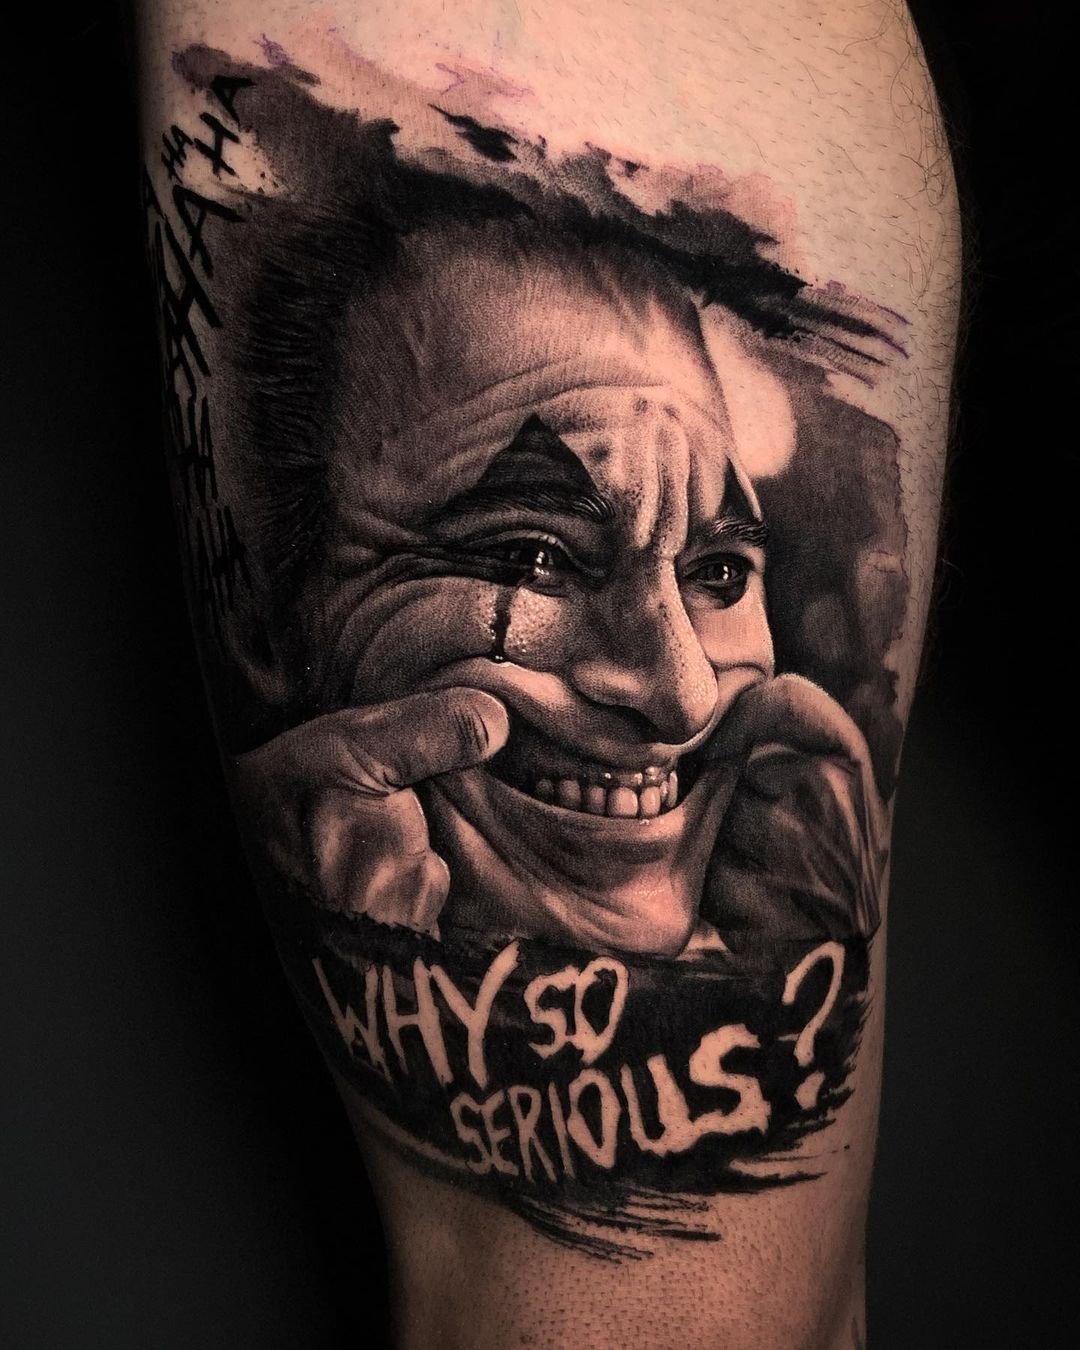 Why so serious tattoo